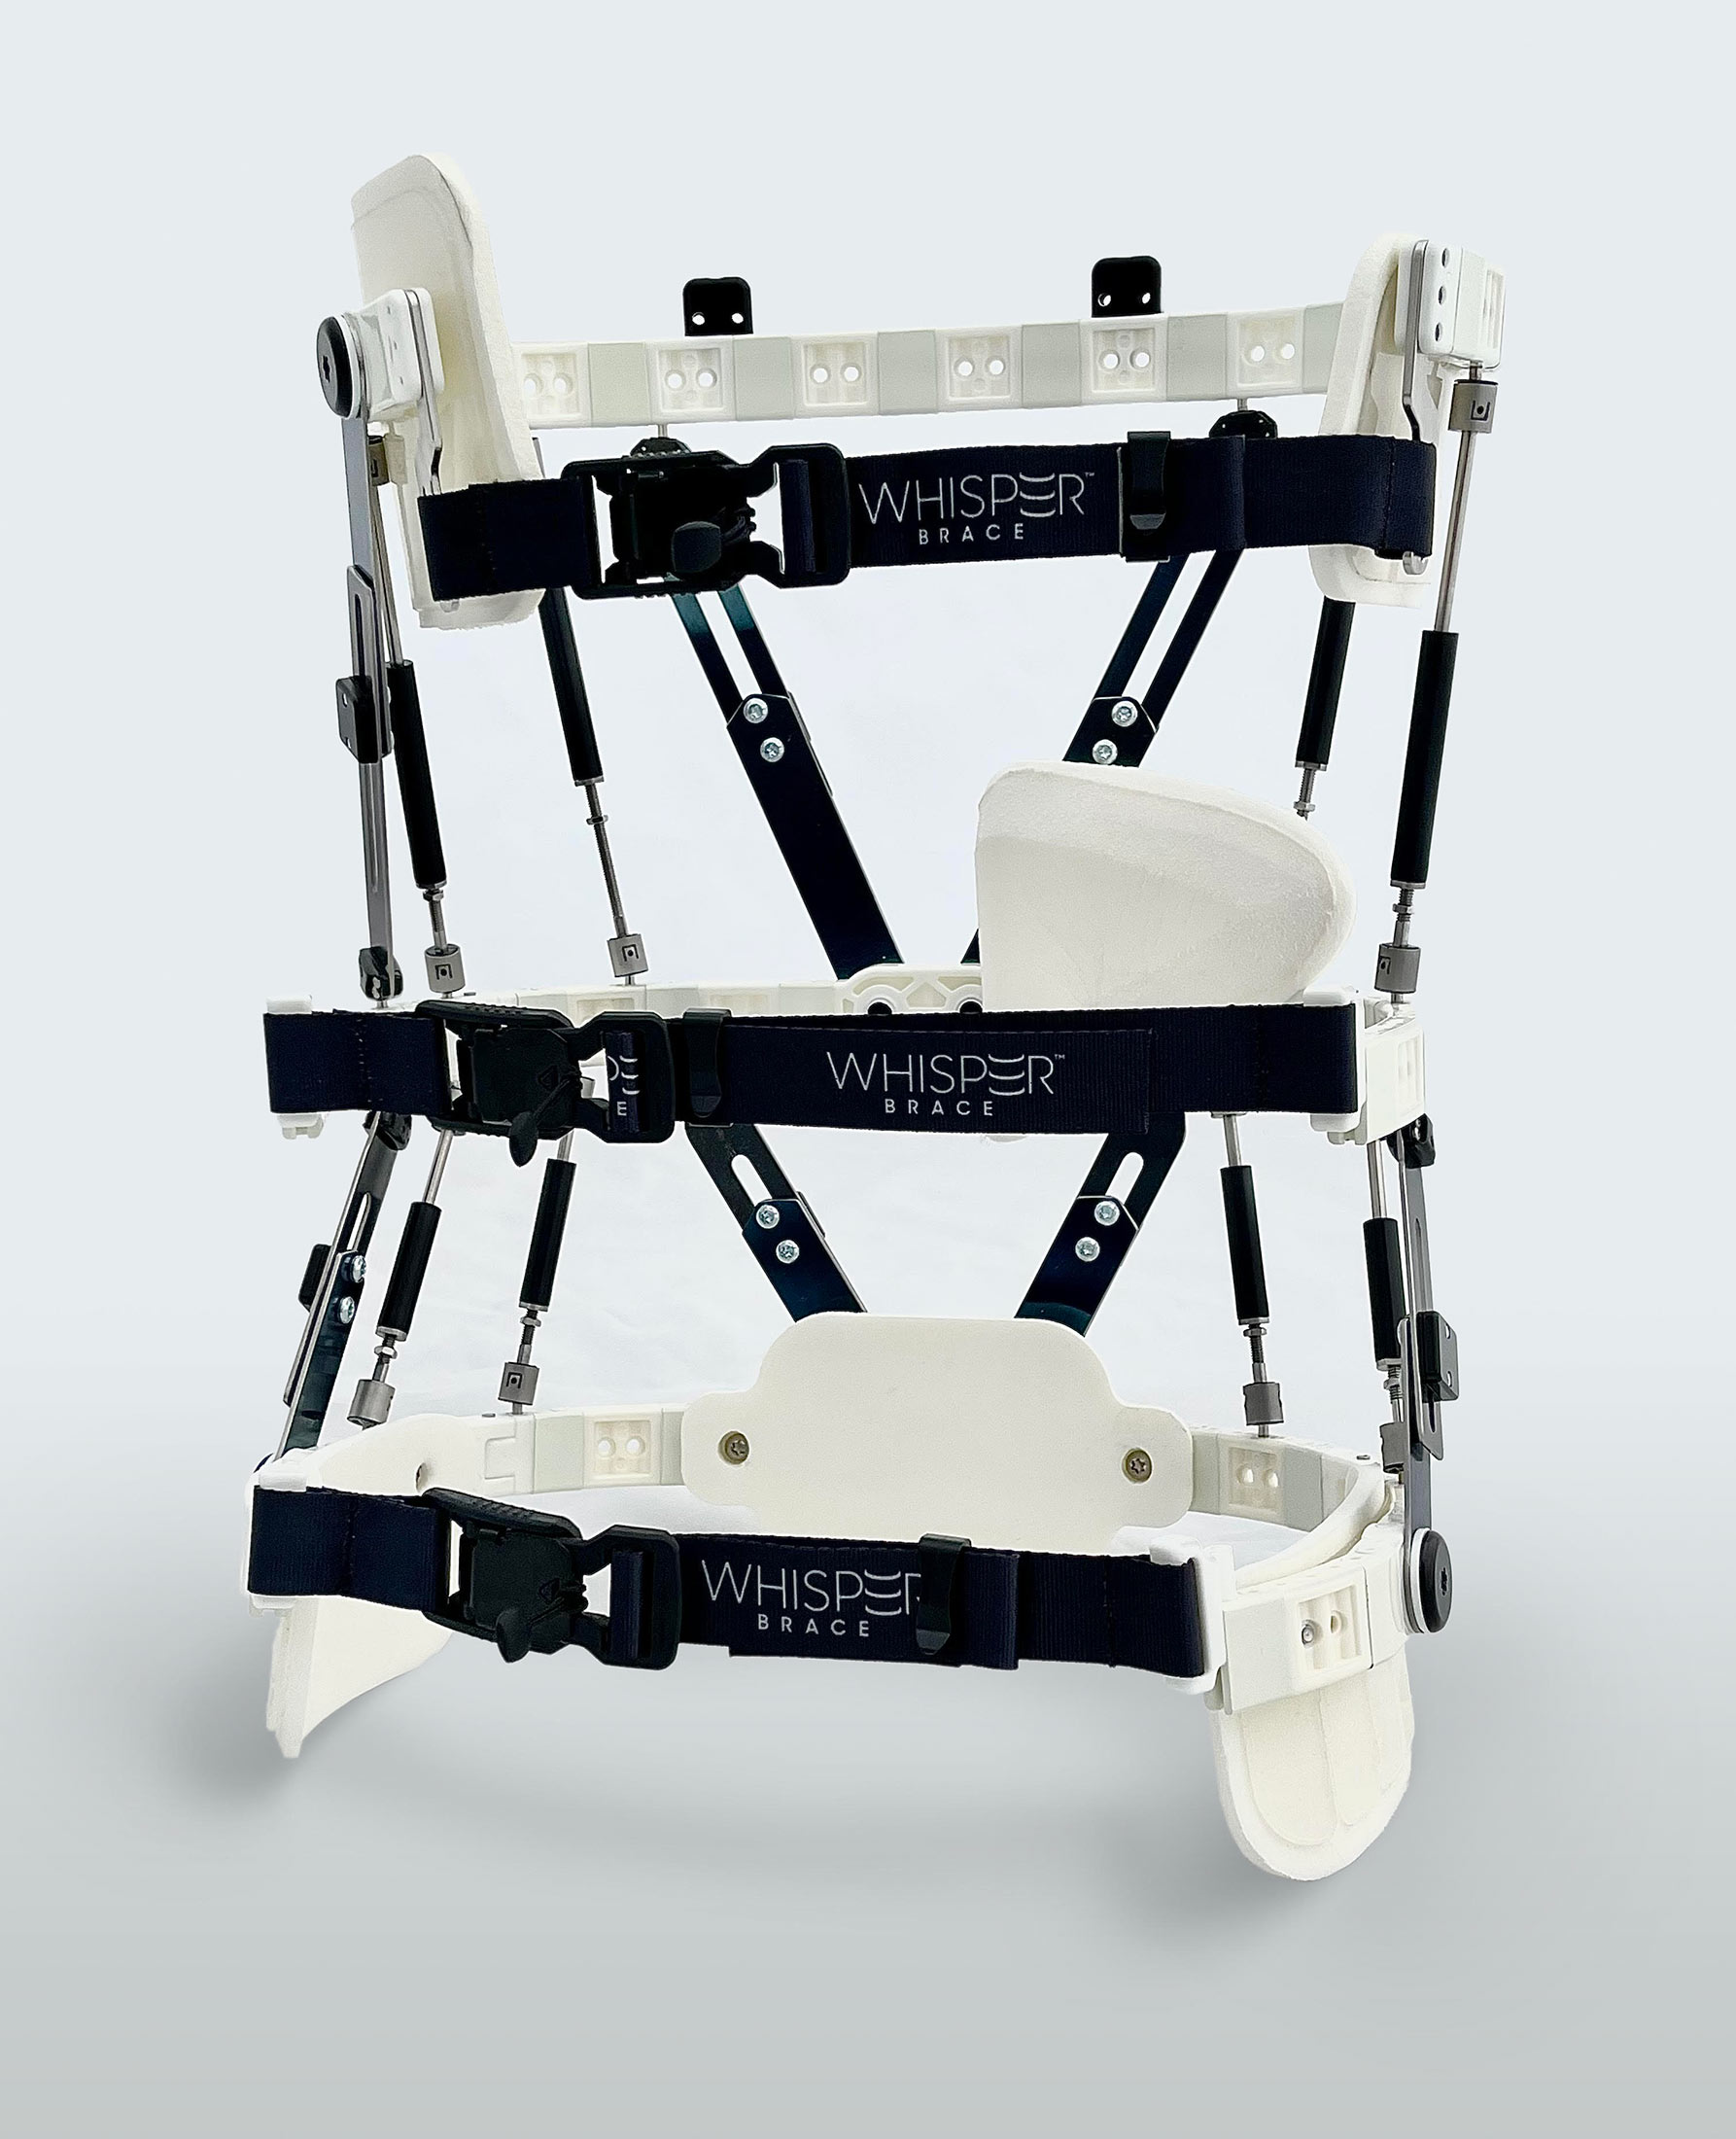 The Whisper scoliosis brace by Green Sun